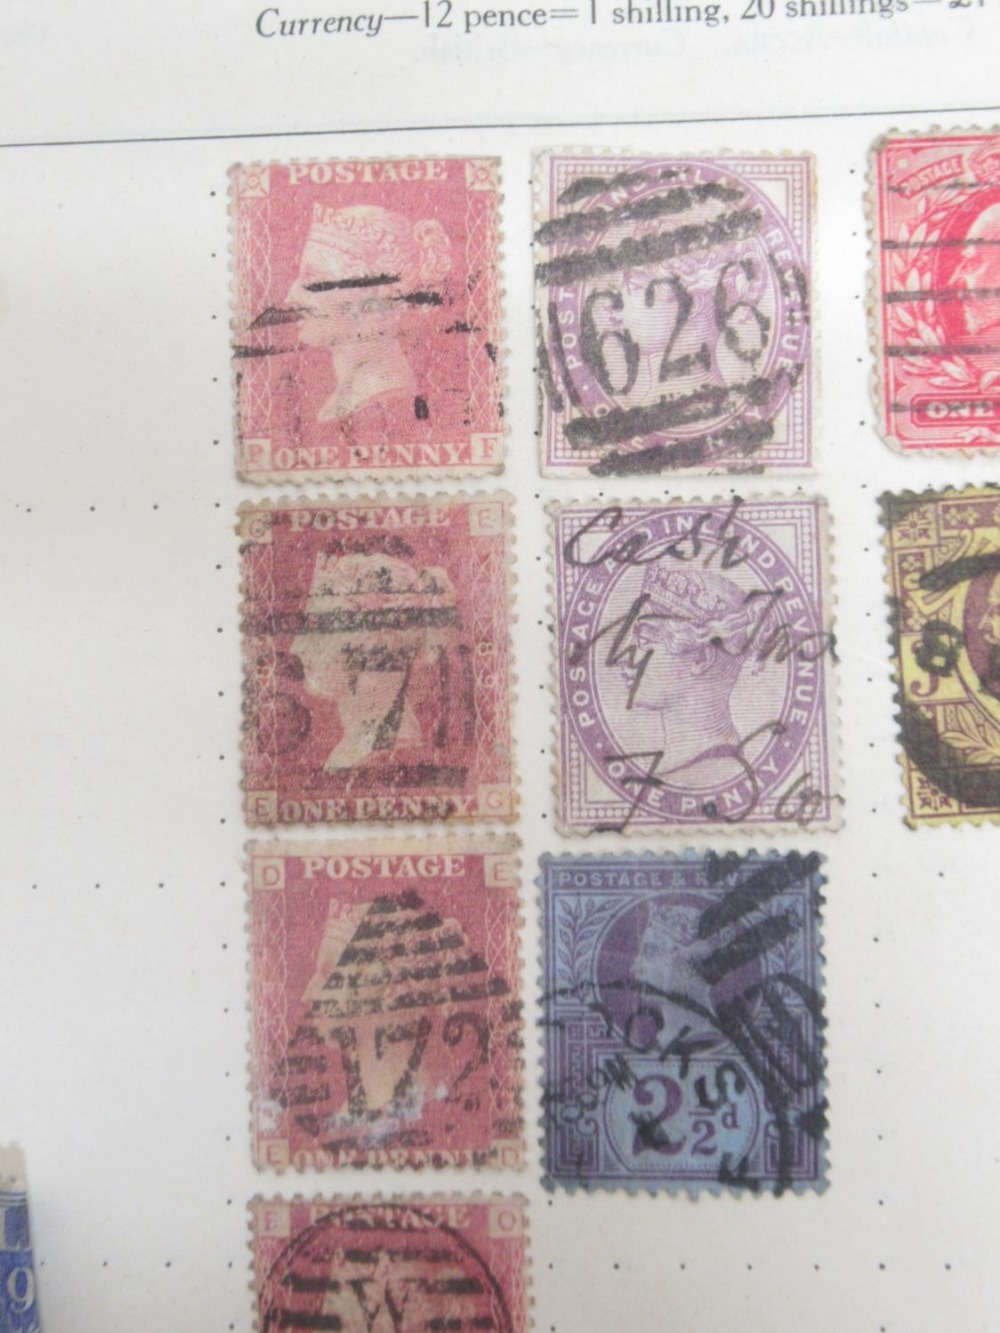 The Strand Stamp Album cont. 5 used penny reds, red and green folders cont. c20th British stamps, - Bild 6 aus 14